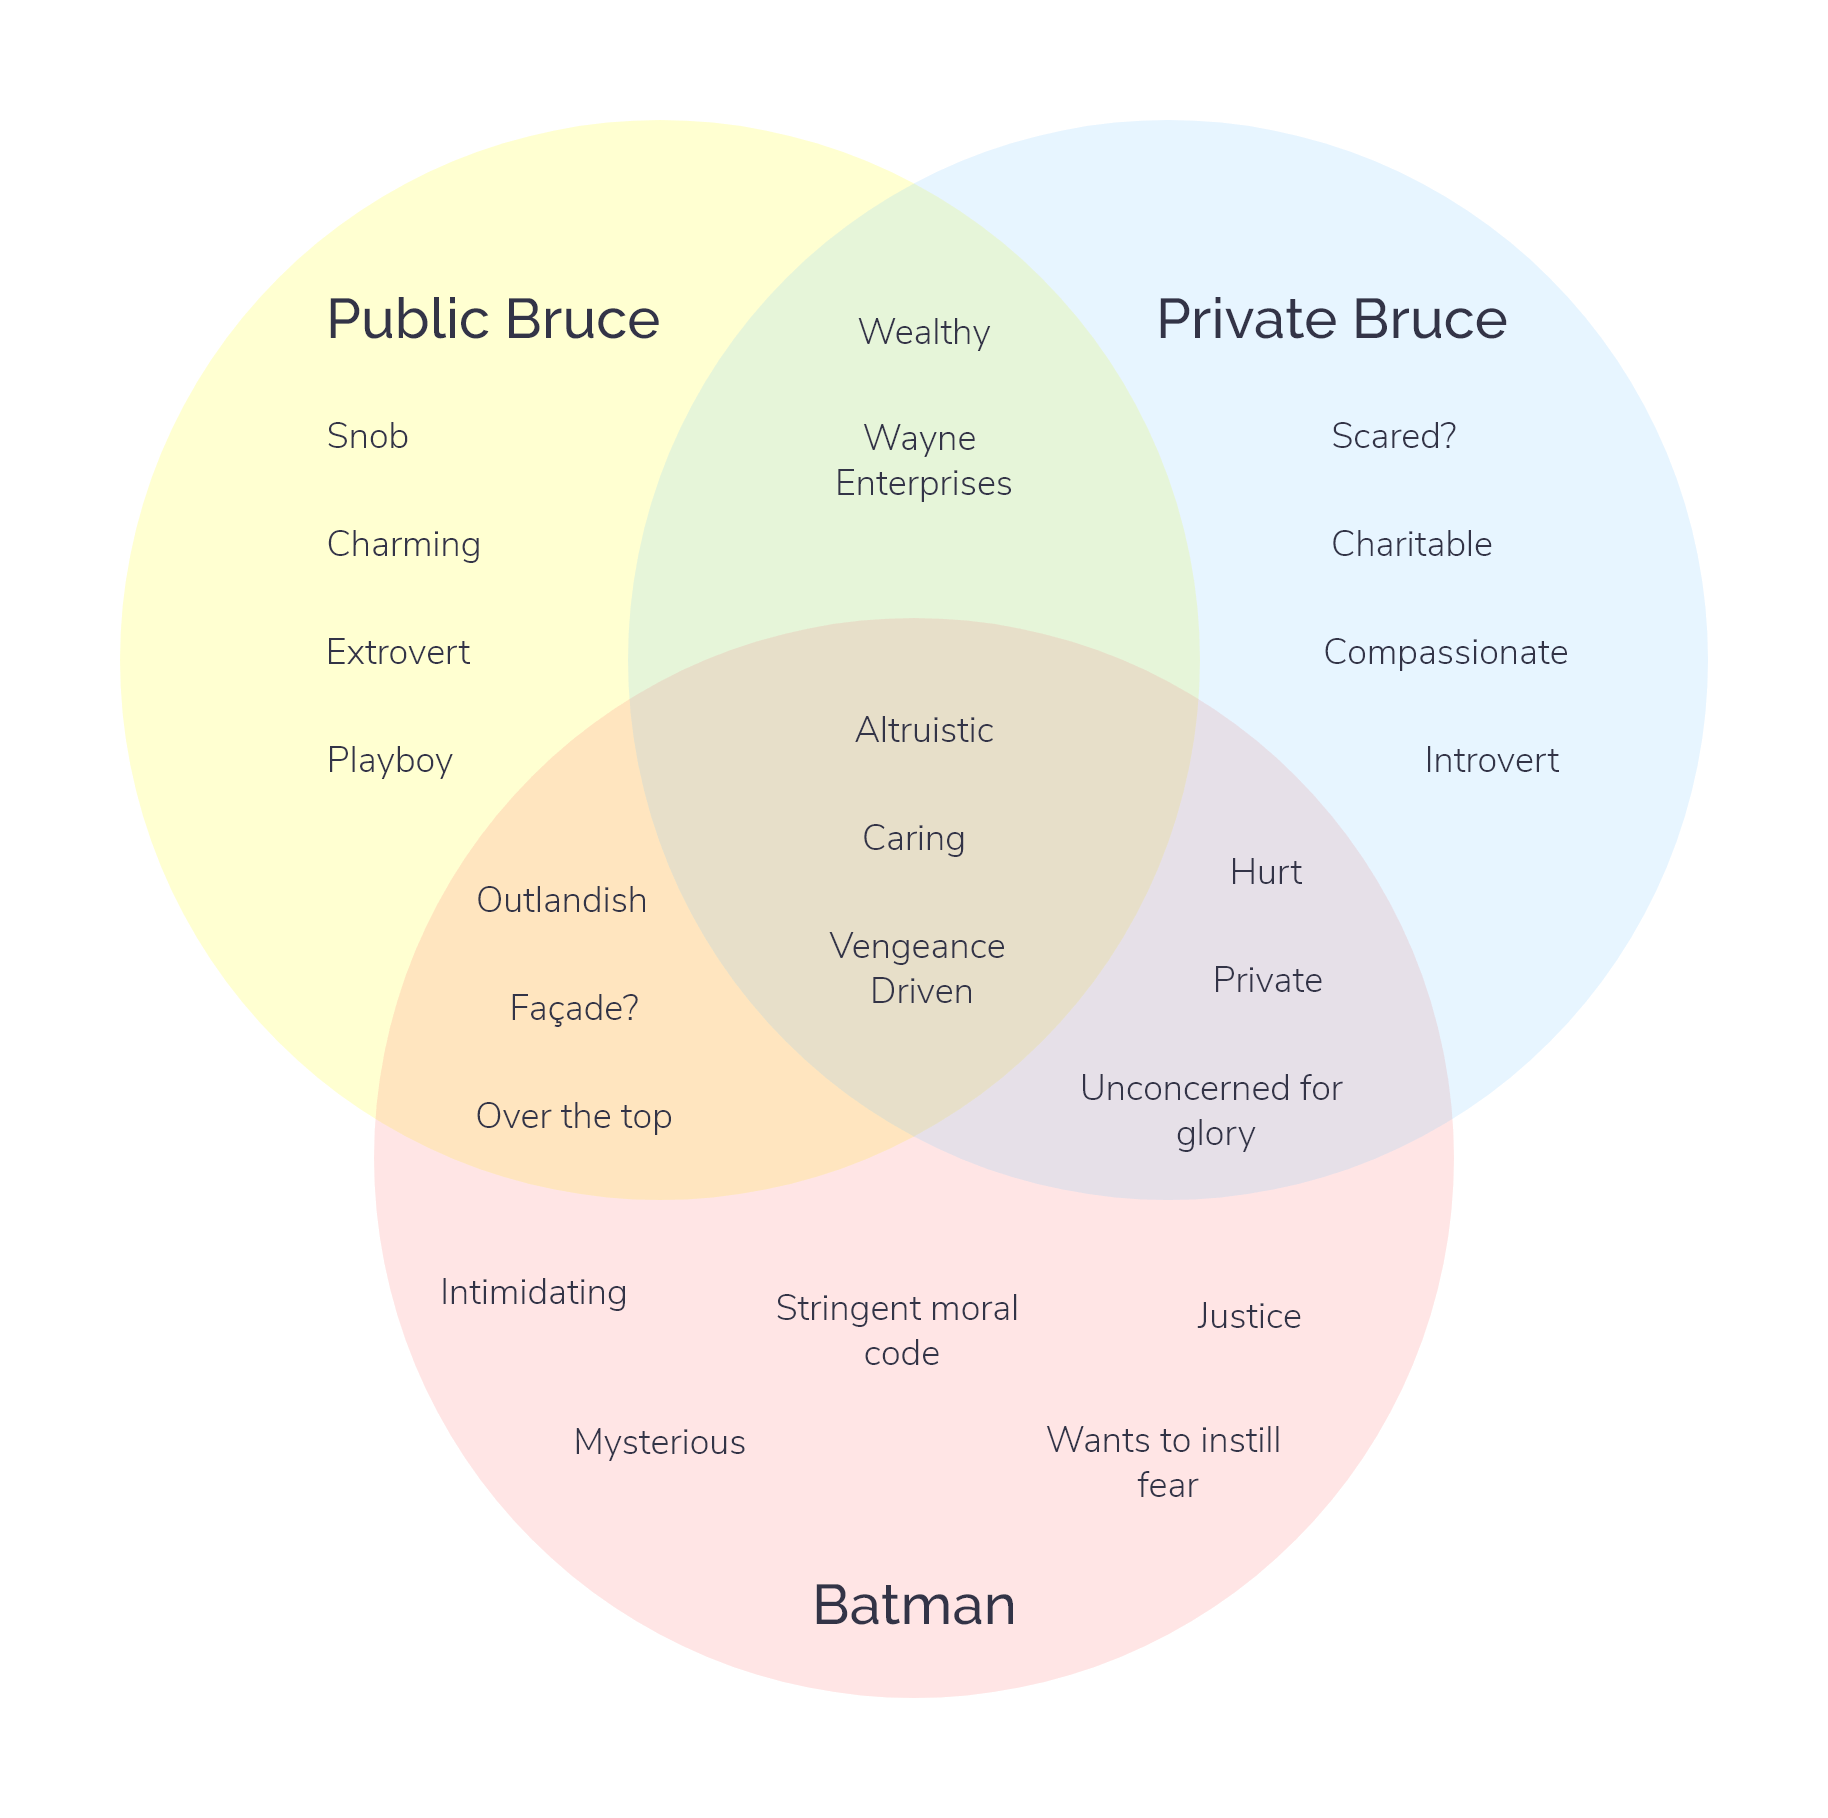 A venn diagram showing how the different personas of Bruce relate with one another with Caring, Altruistic, and Vengeance Driven being the common themes between all his personas